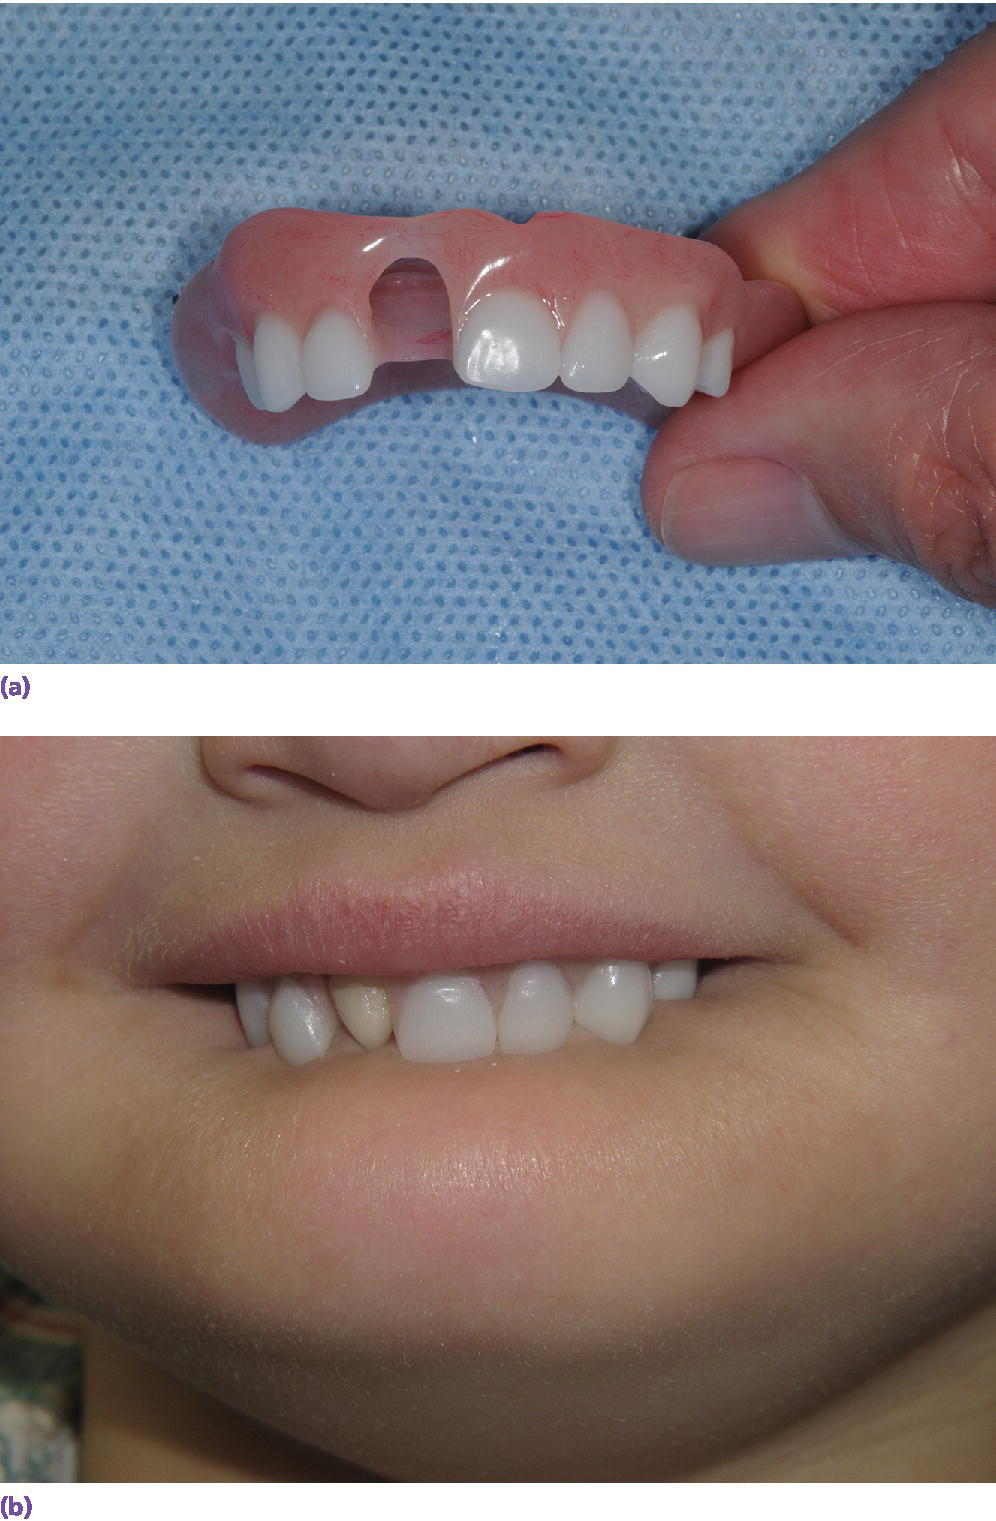 Photos displaying maxillary removable partial prosthesis (top) and a child biting his complete teeth (bottom).